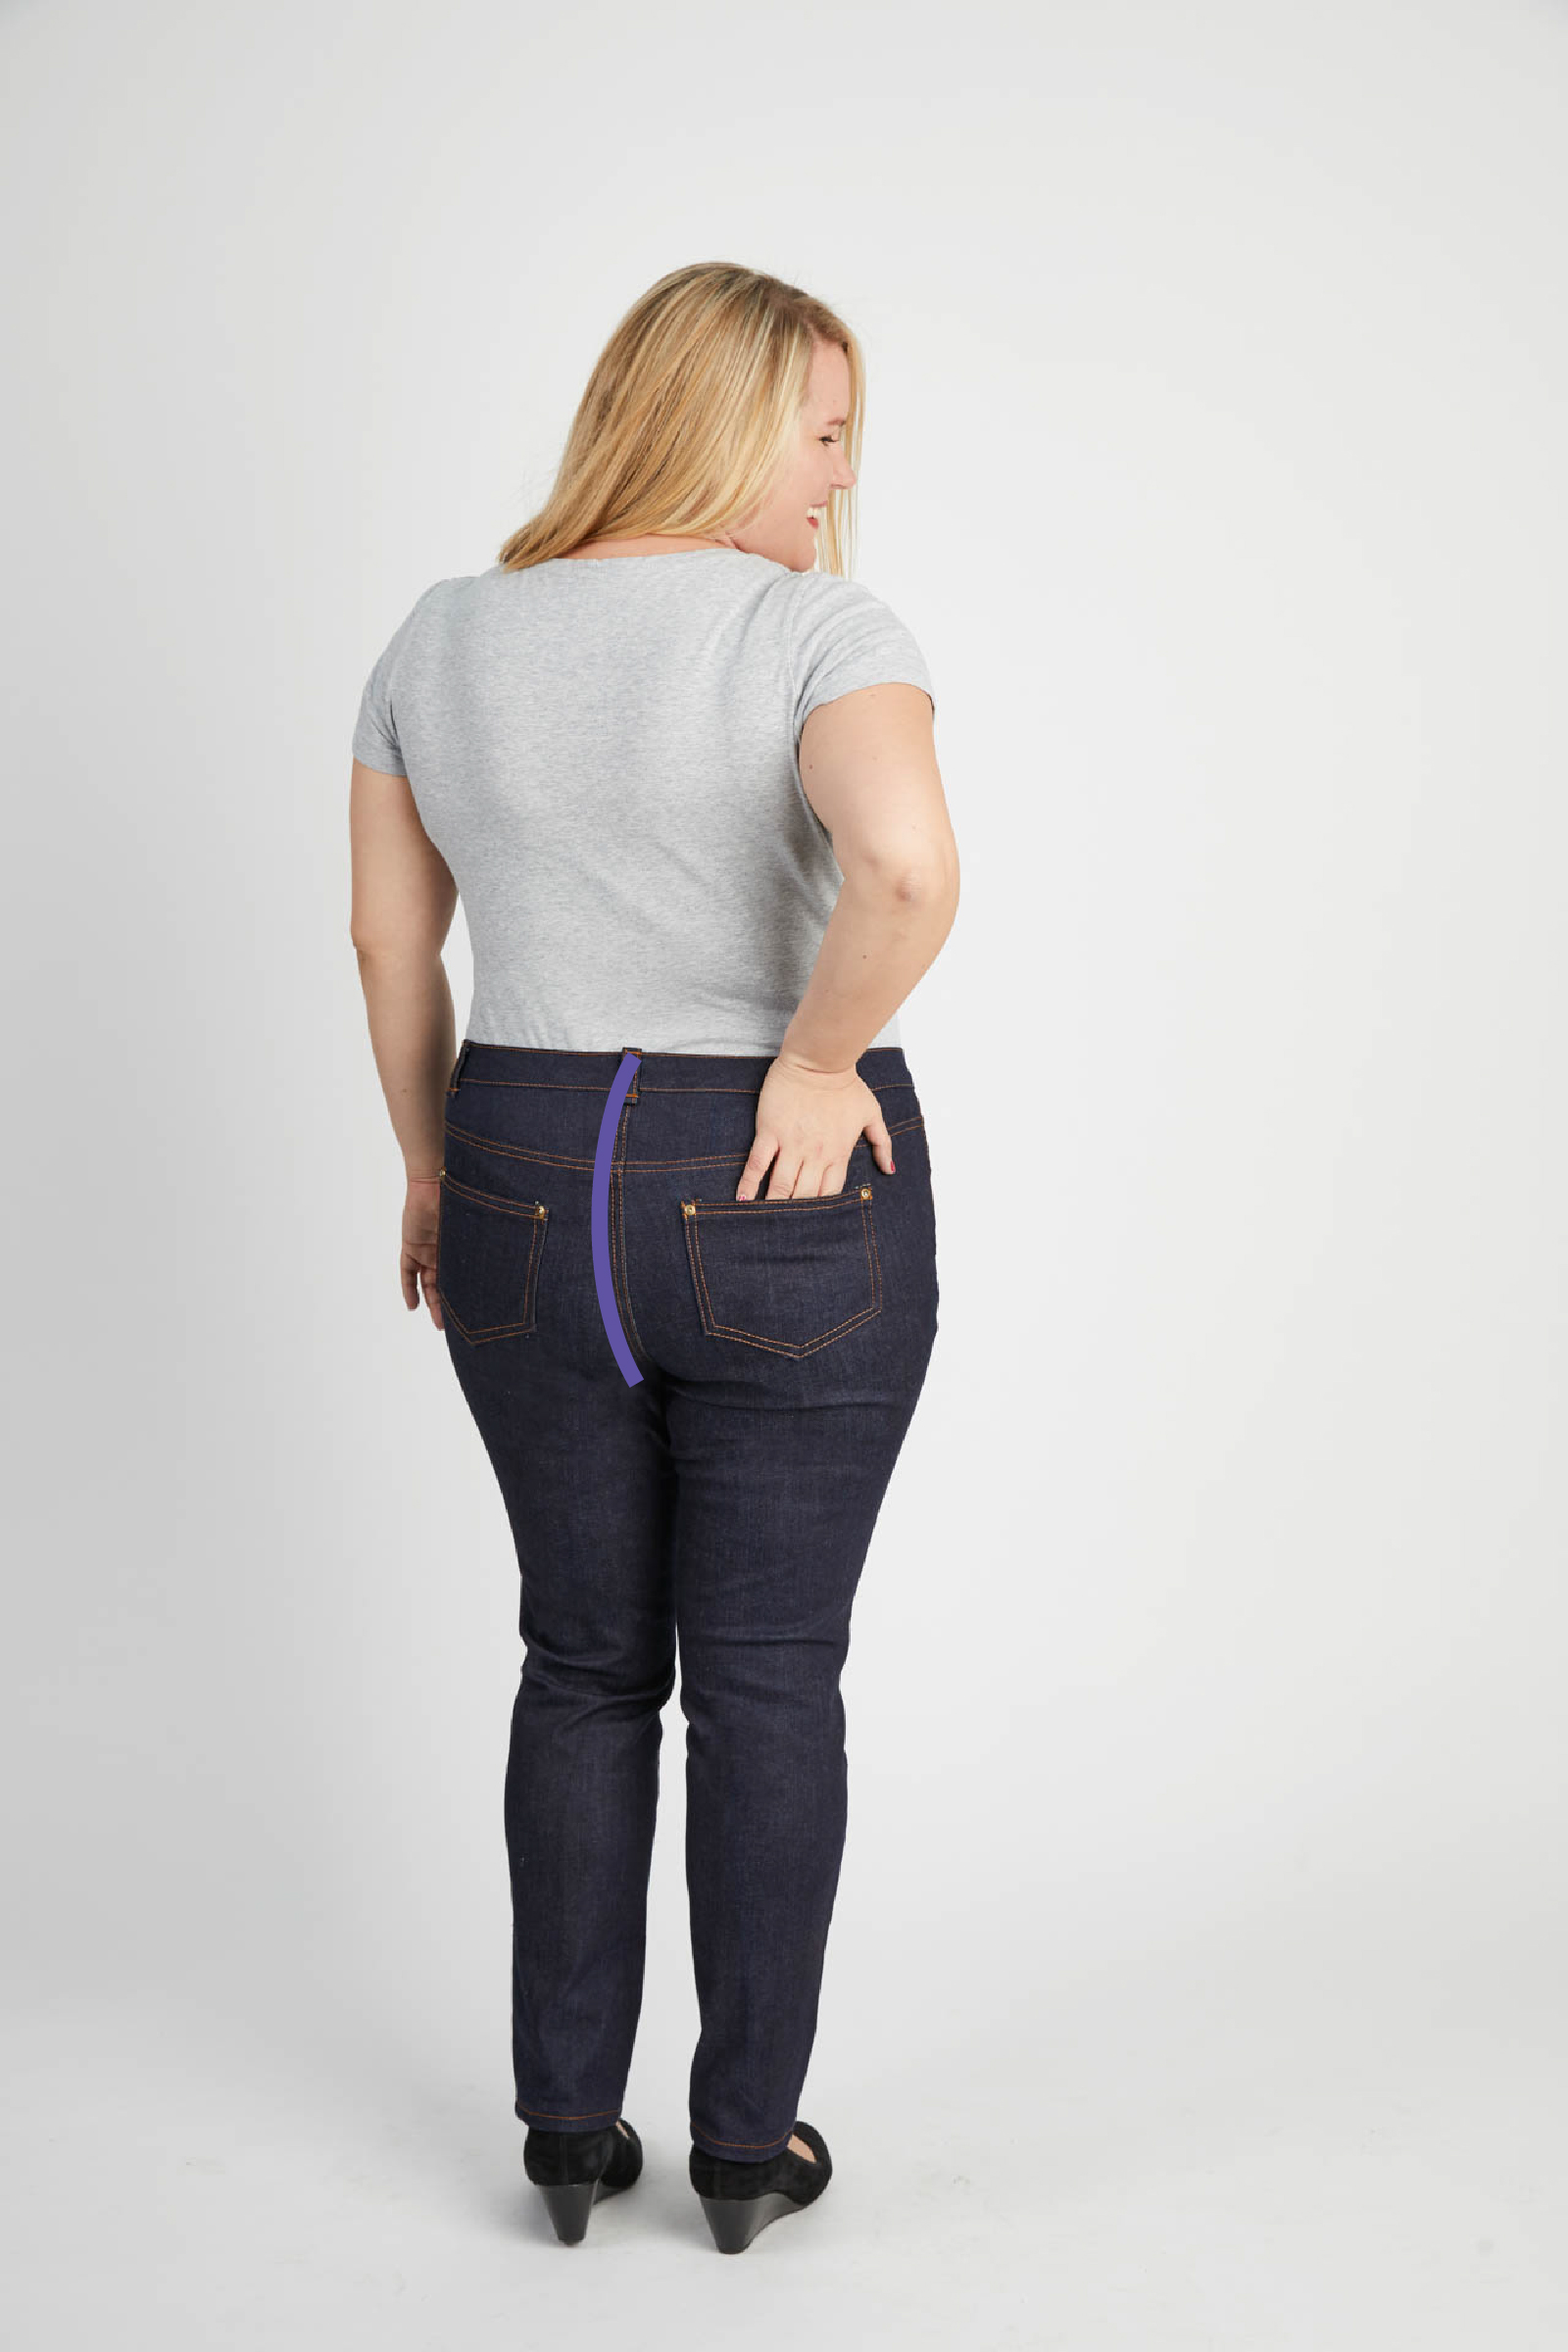 How to choose your Ames Jeans Fit